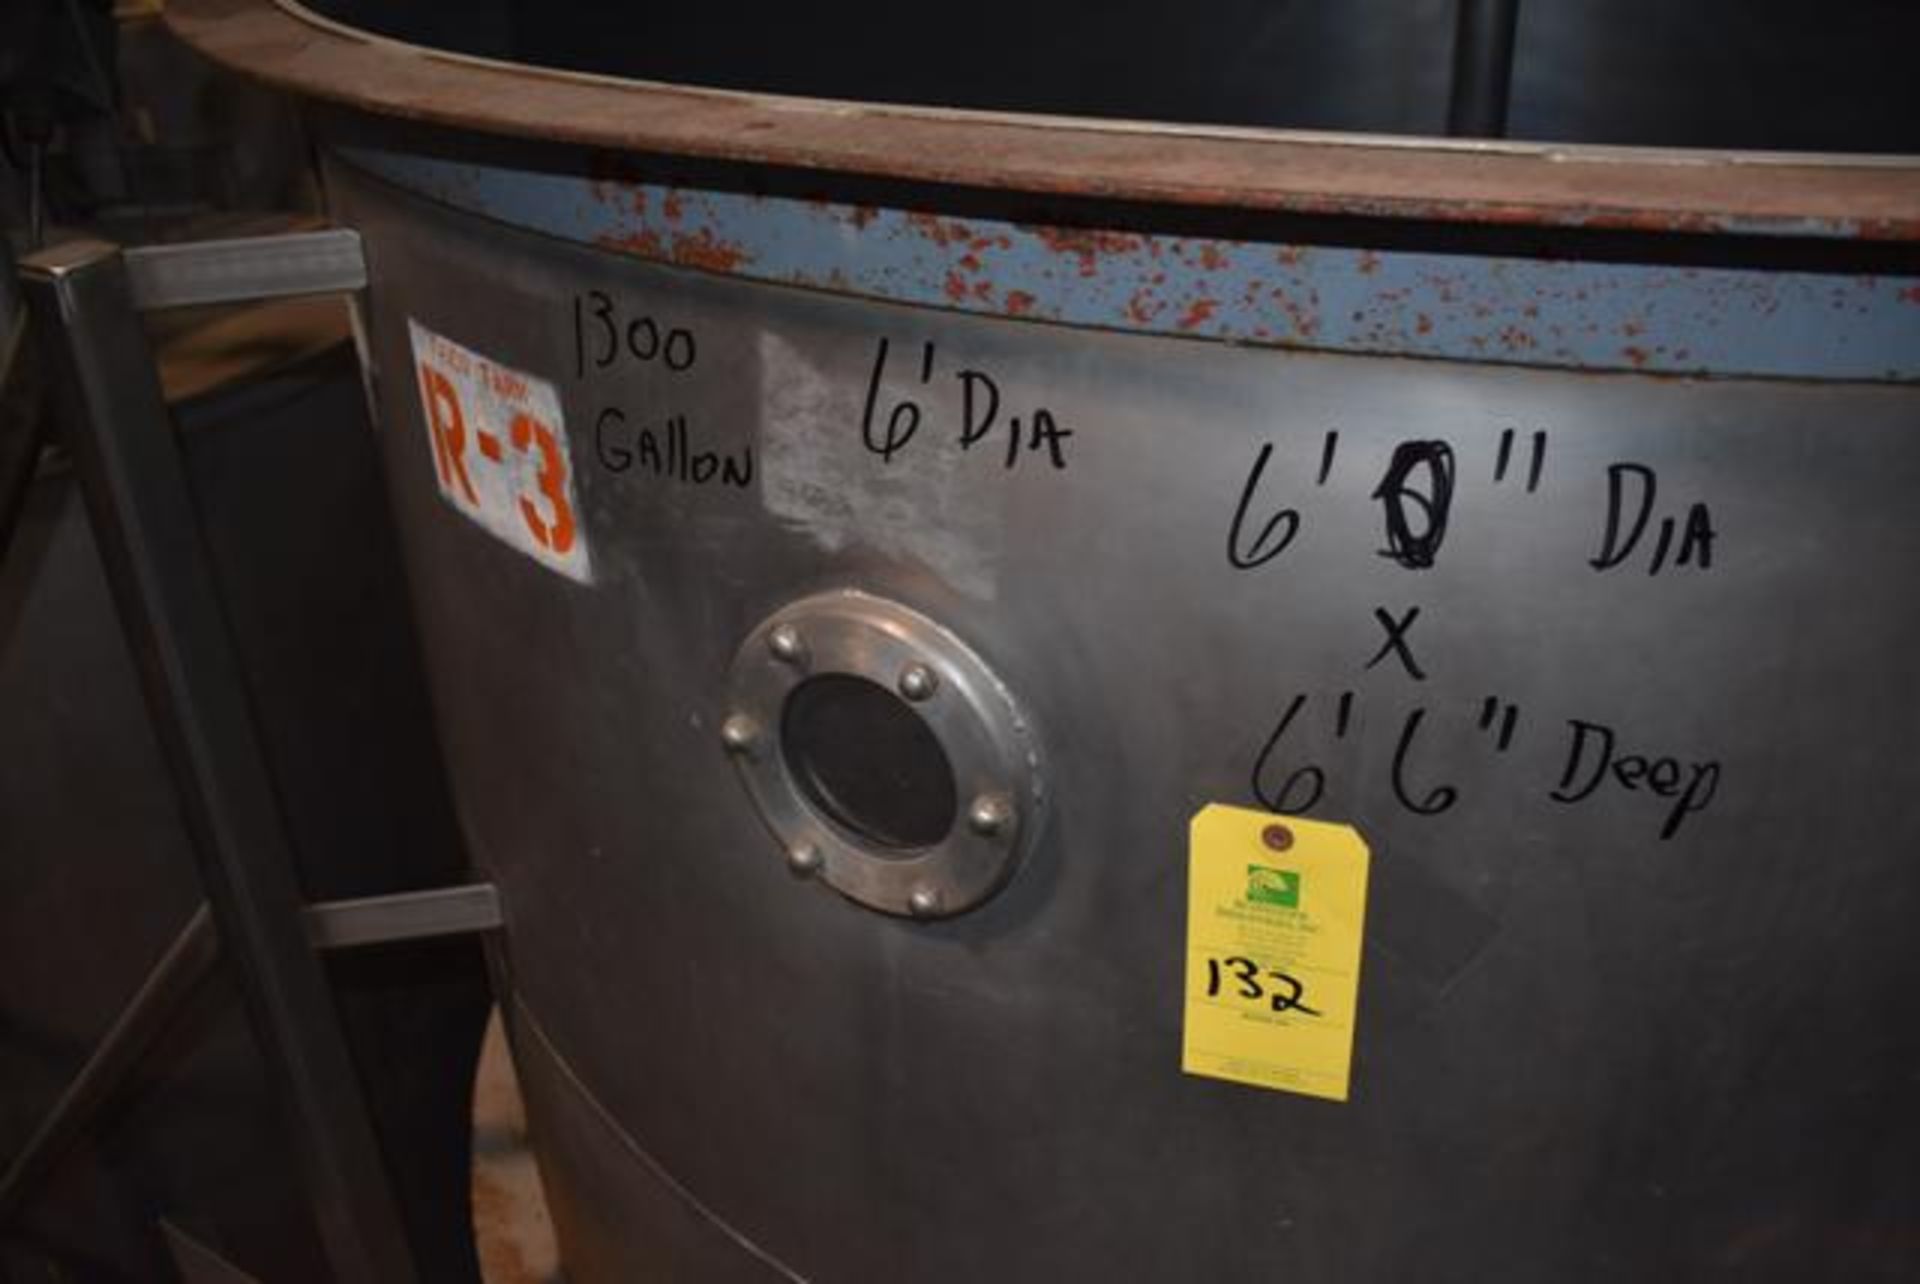 Stainless Steel Tank w/Lid, 72" Diameter x 78" Depth, Rated 1300 Gal. Capacity, Includes Mixer, ID - Image 2 of 3